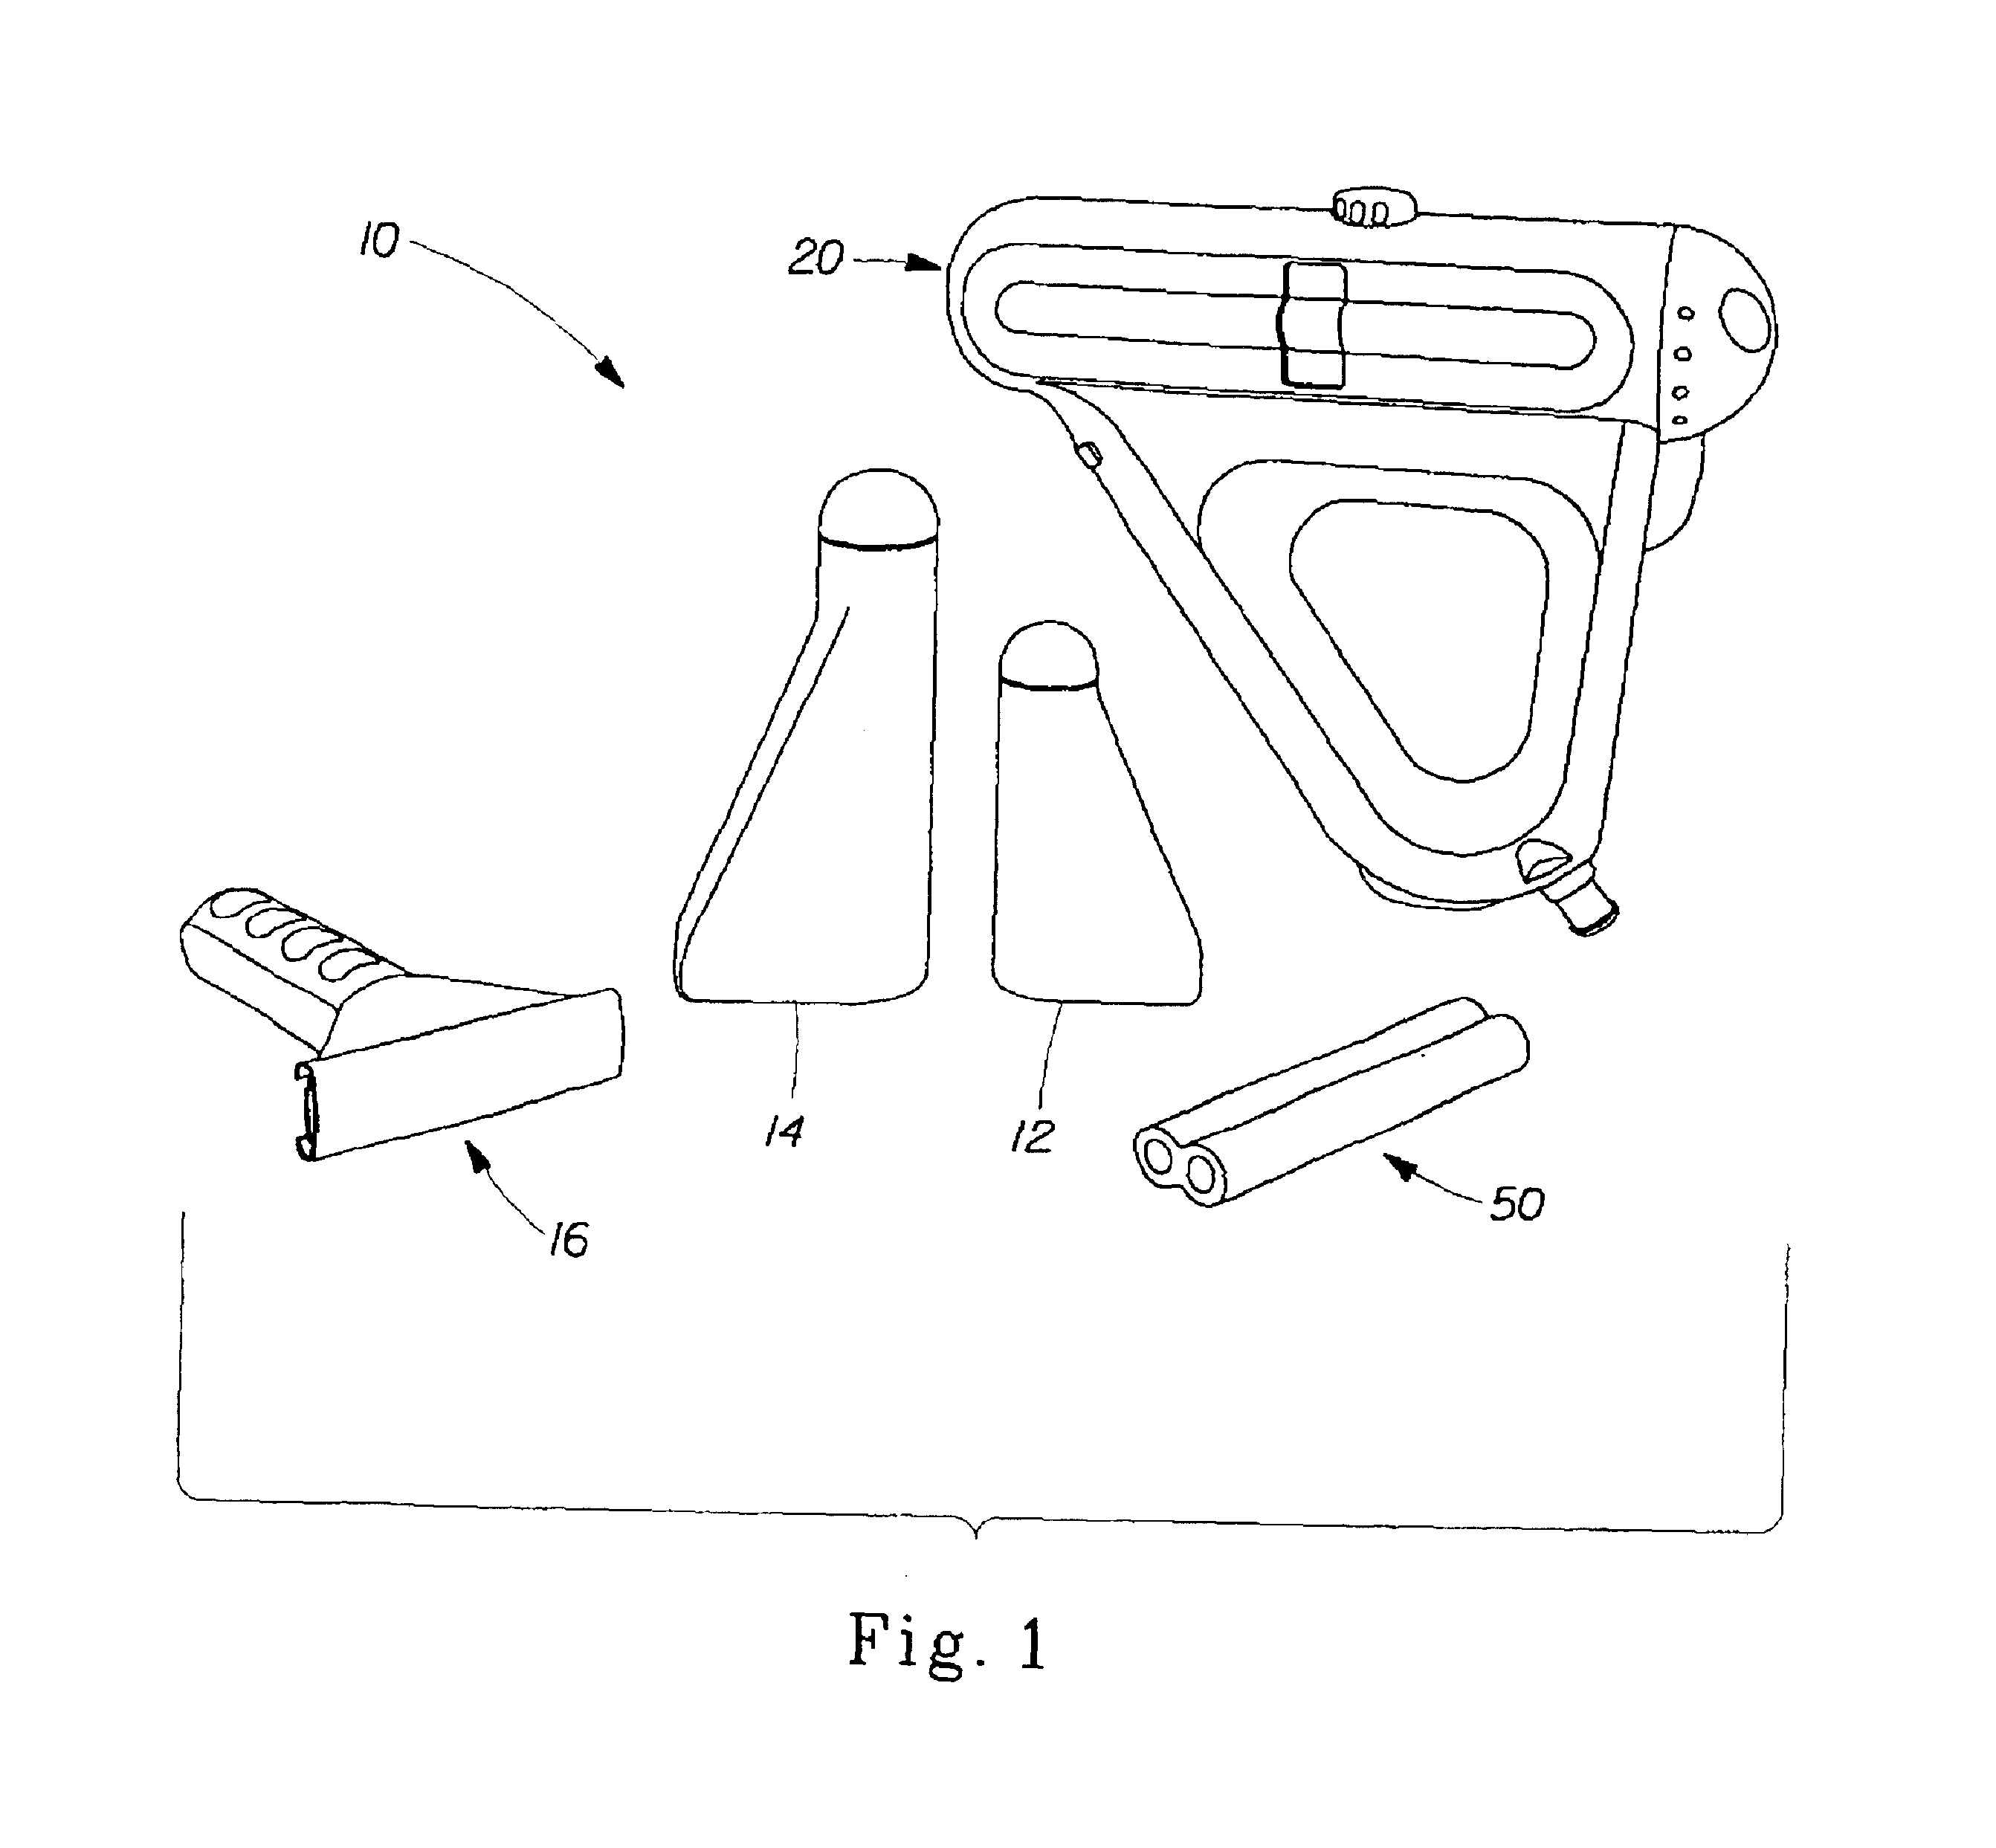 System and method for cleaning and/or treating vehicles and the surfaces of other objects